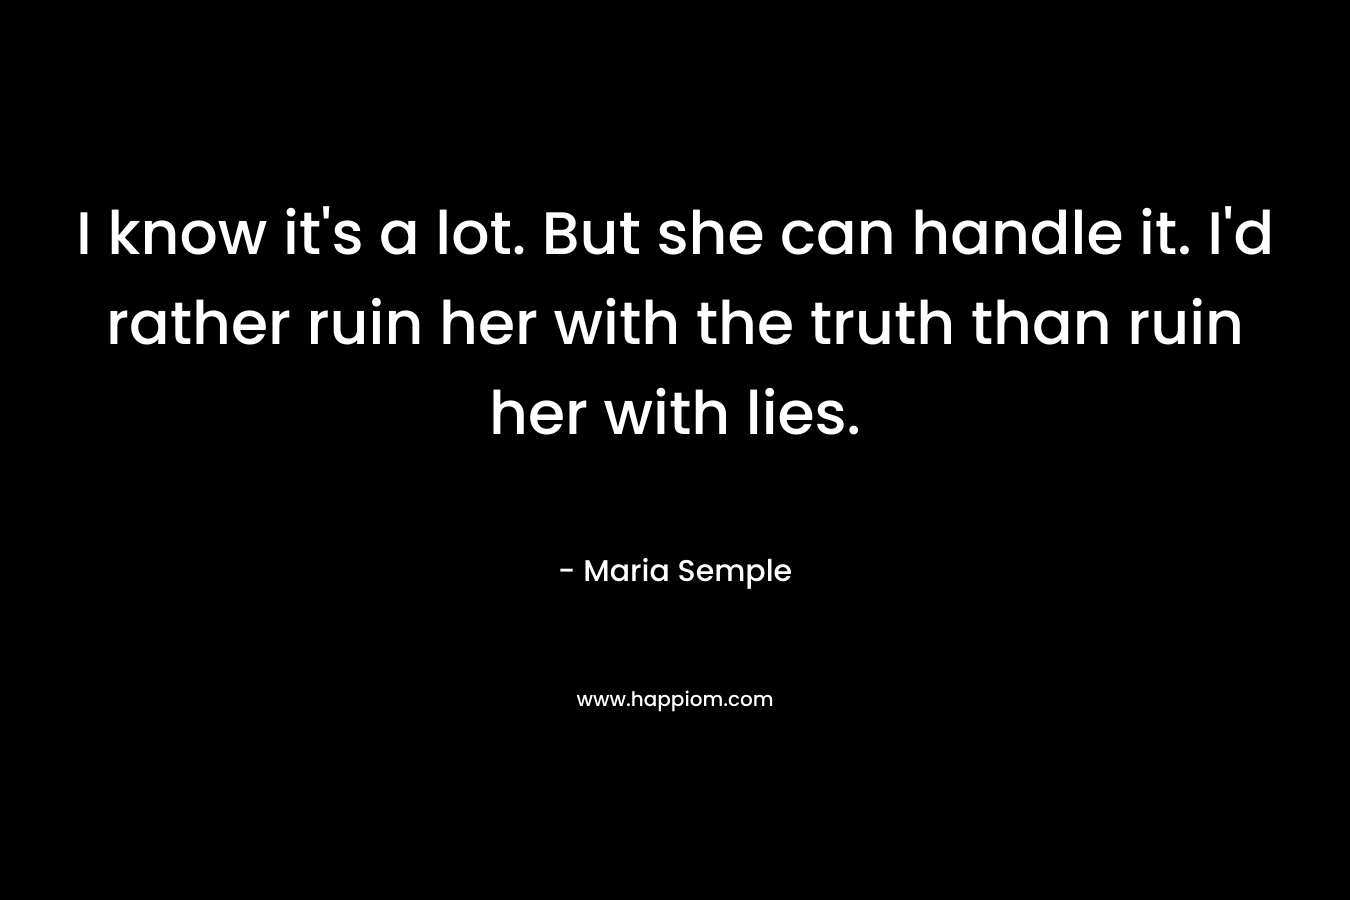 I know it's a lot. But she can handle it. I'd rather ruin her with the truth than ruin her with lies.